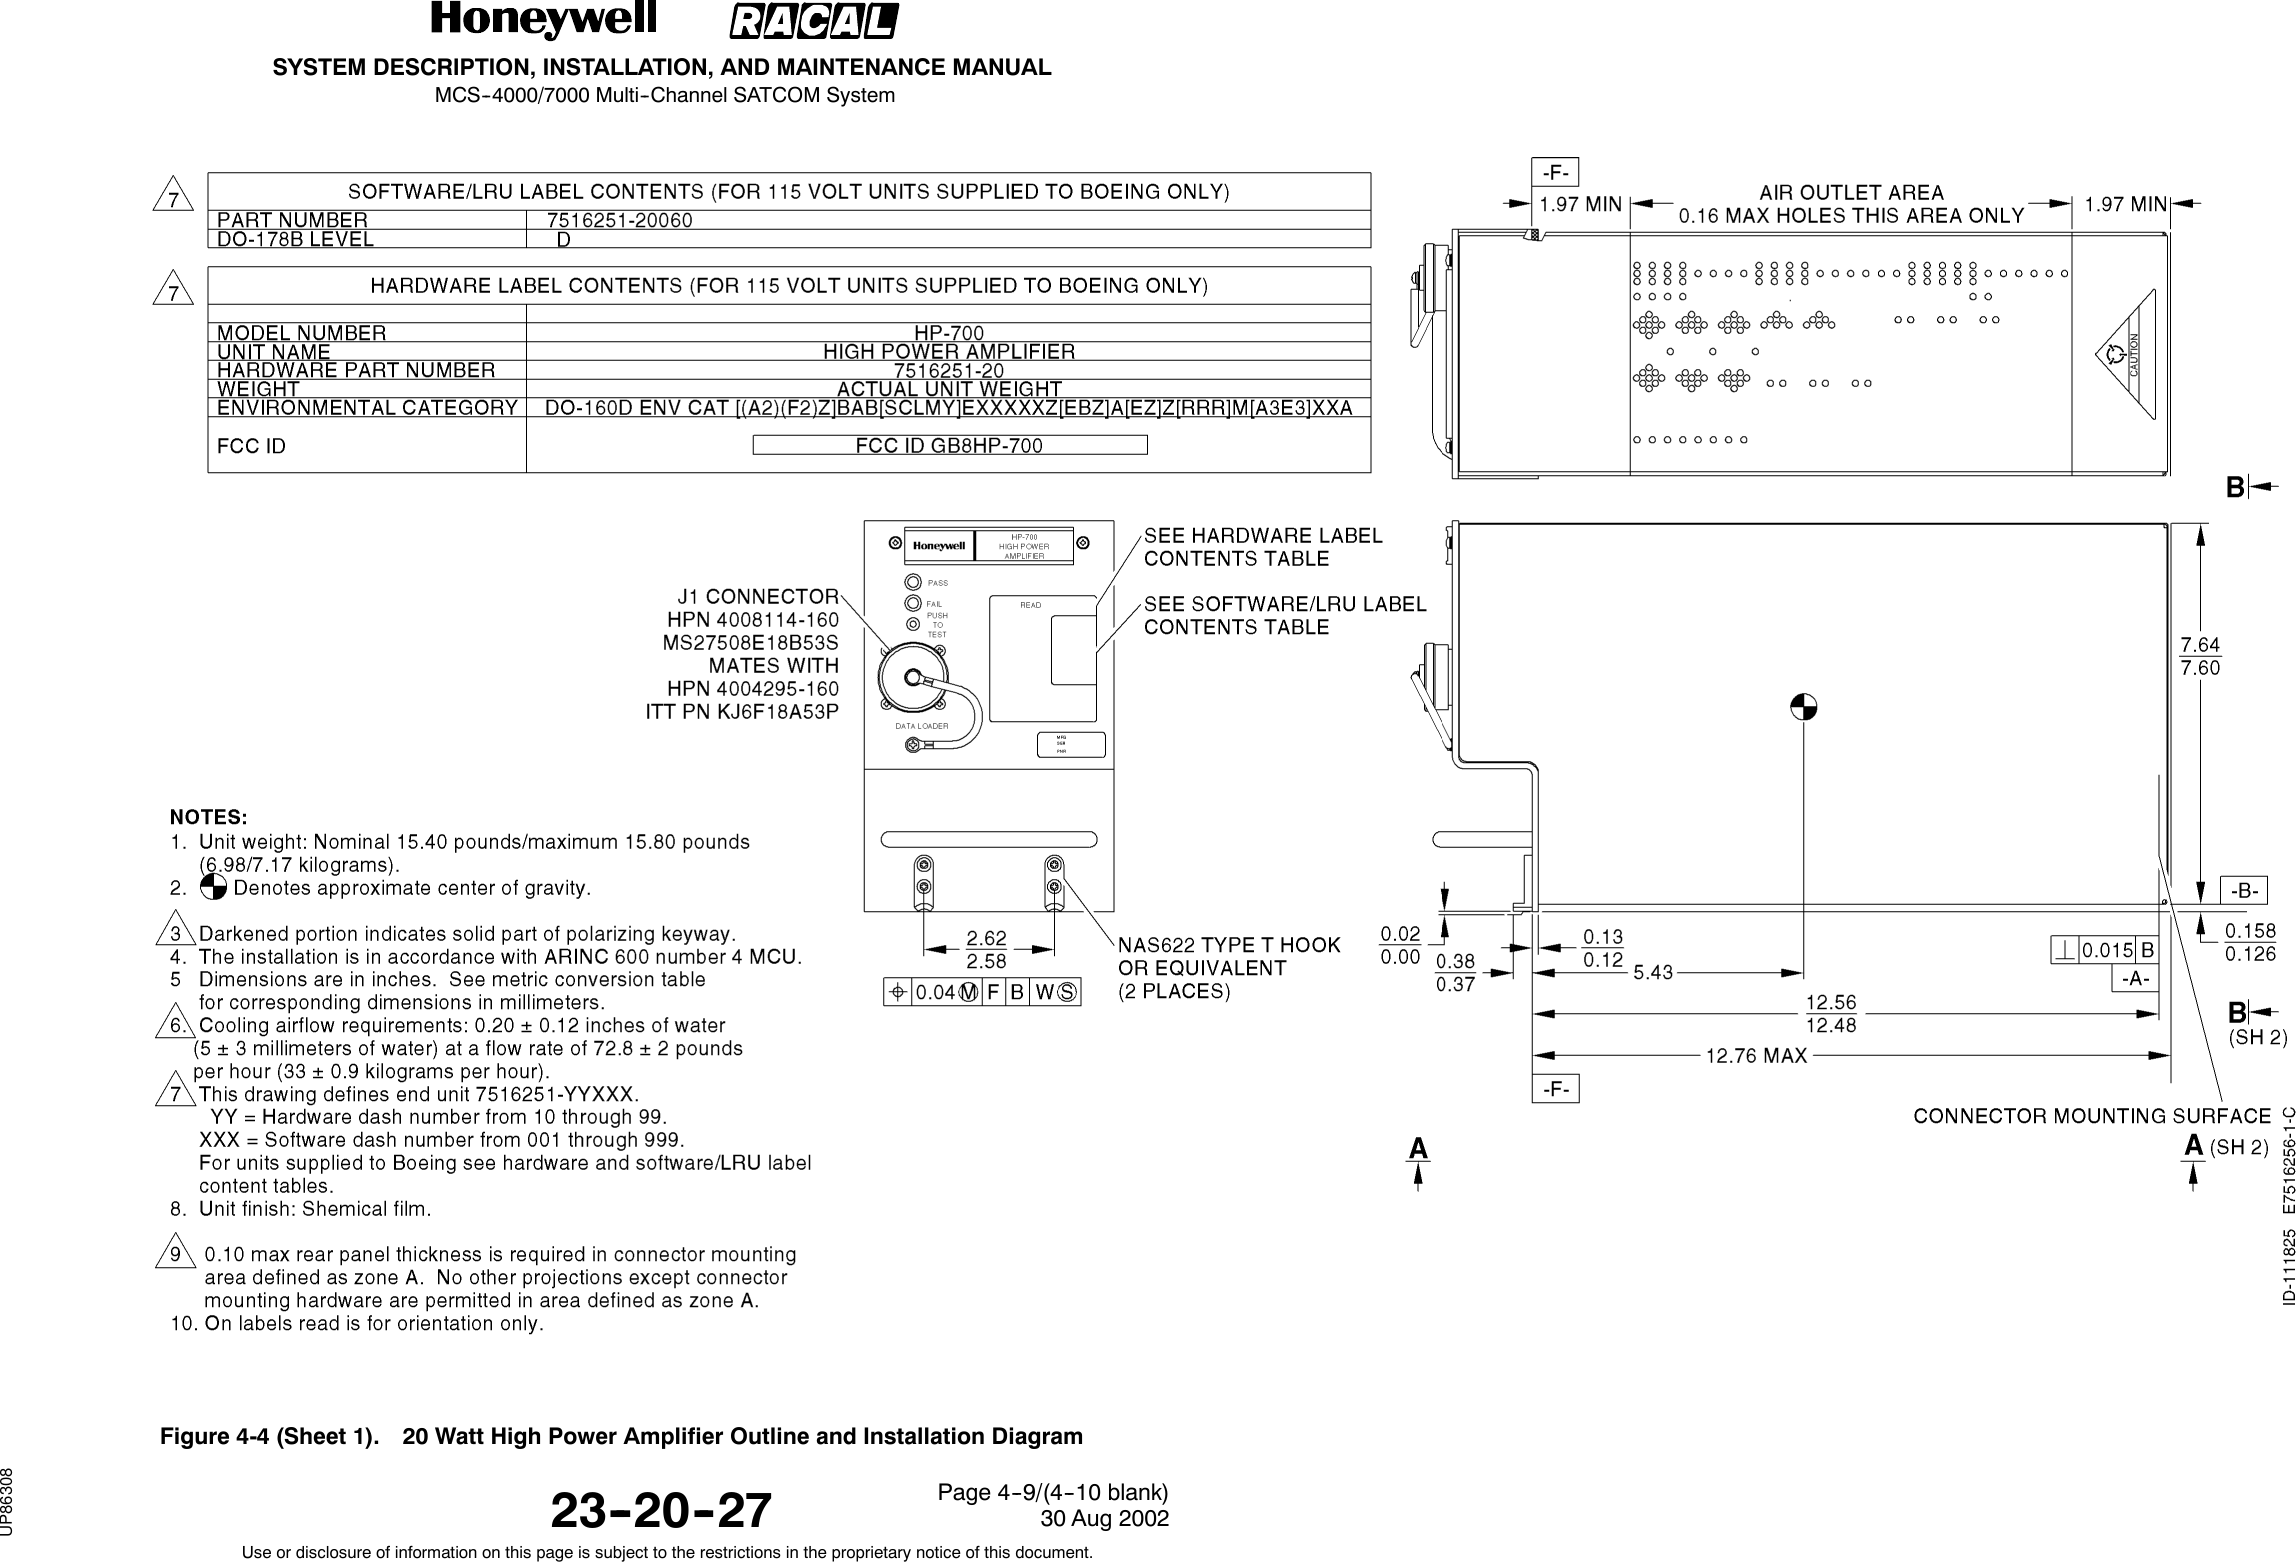 SYSTEM DESCRIPTION, INSTALLATION, AND MAINTENANCE MANUALMCS--4000/7000 Multi--Channel SATCOM System23--20--2730 Aug 2002Use or disclosure of information on this page is subject to the restrictions in the proprietary notice of this document.Page 4--9/(4--10 blank)Figure 4-4 (Sheet 1). 20 Watt High Power Amplifier Outline and Installation DiagramRELEASED FOR THE EXCLUSIVE USE BY: HONEYWELL INTERNATIONALUP86308